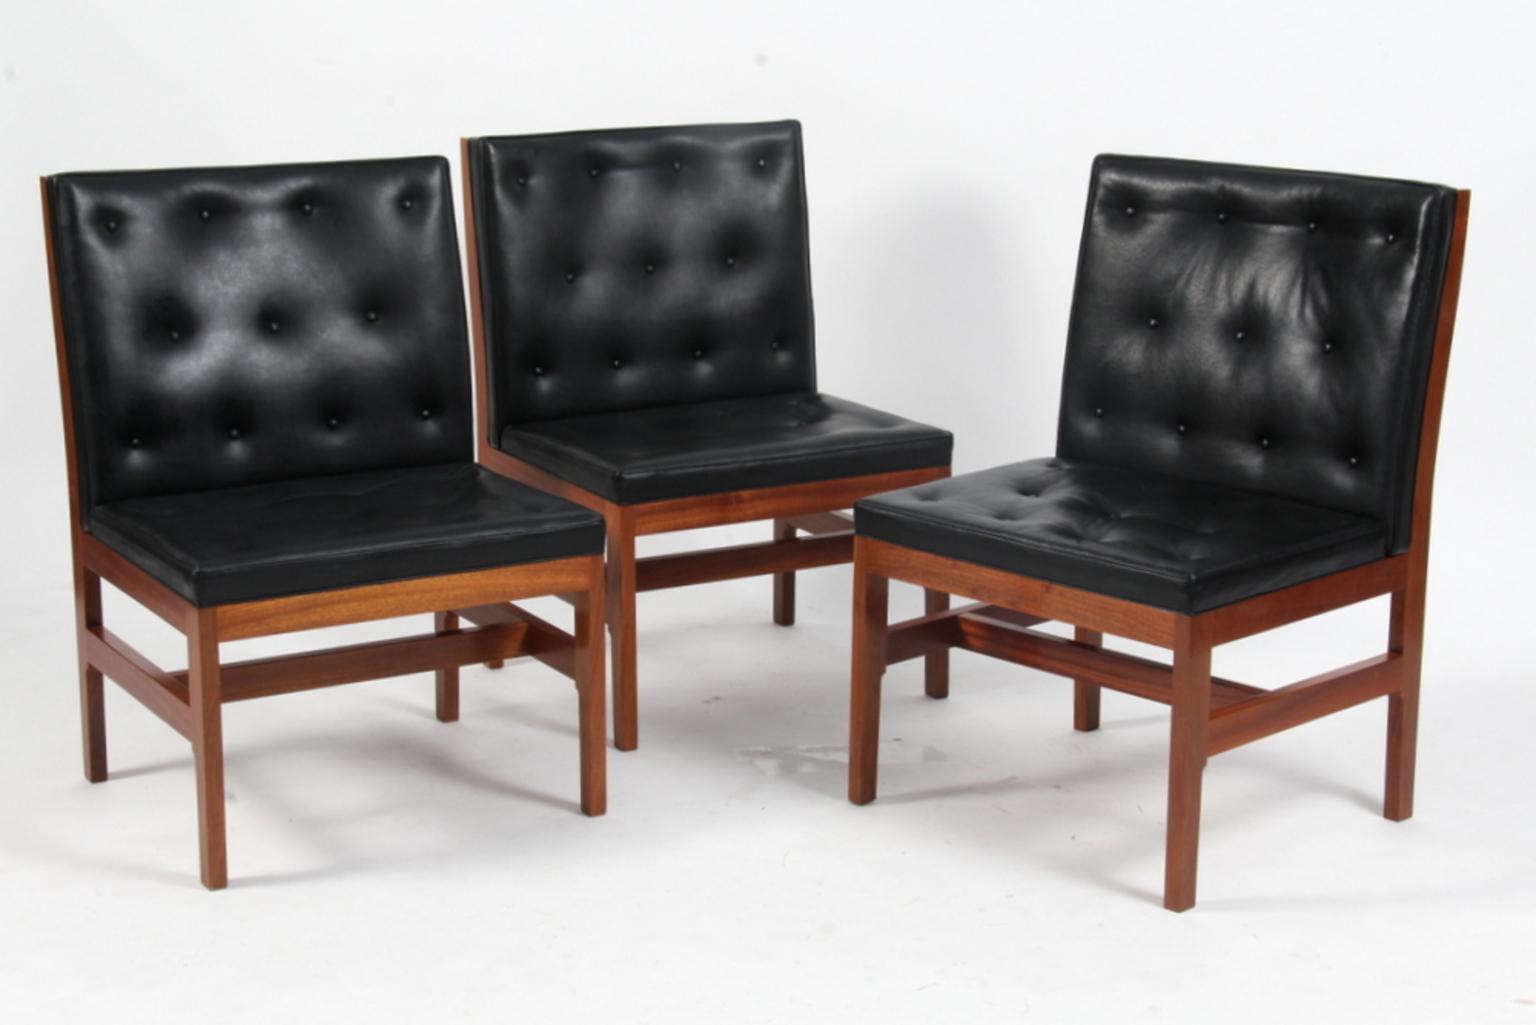 A set of three additional chairs by Mogens Koch. Executed by Rud. Rasmussen.

Mahogany and black leather. 

The reverse with paper labels ‘RUD. RASMUSSENS/SNEDKERIER/COPENHAGEN/DENMARK.